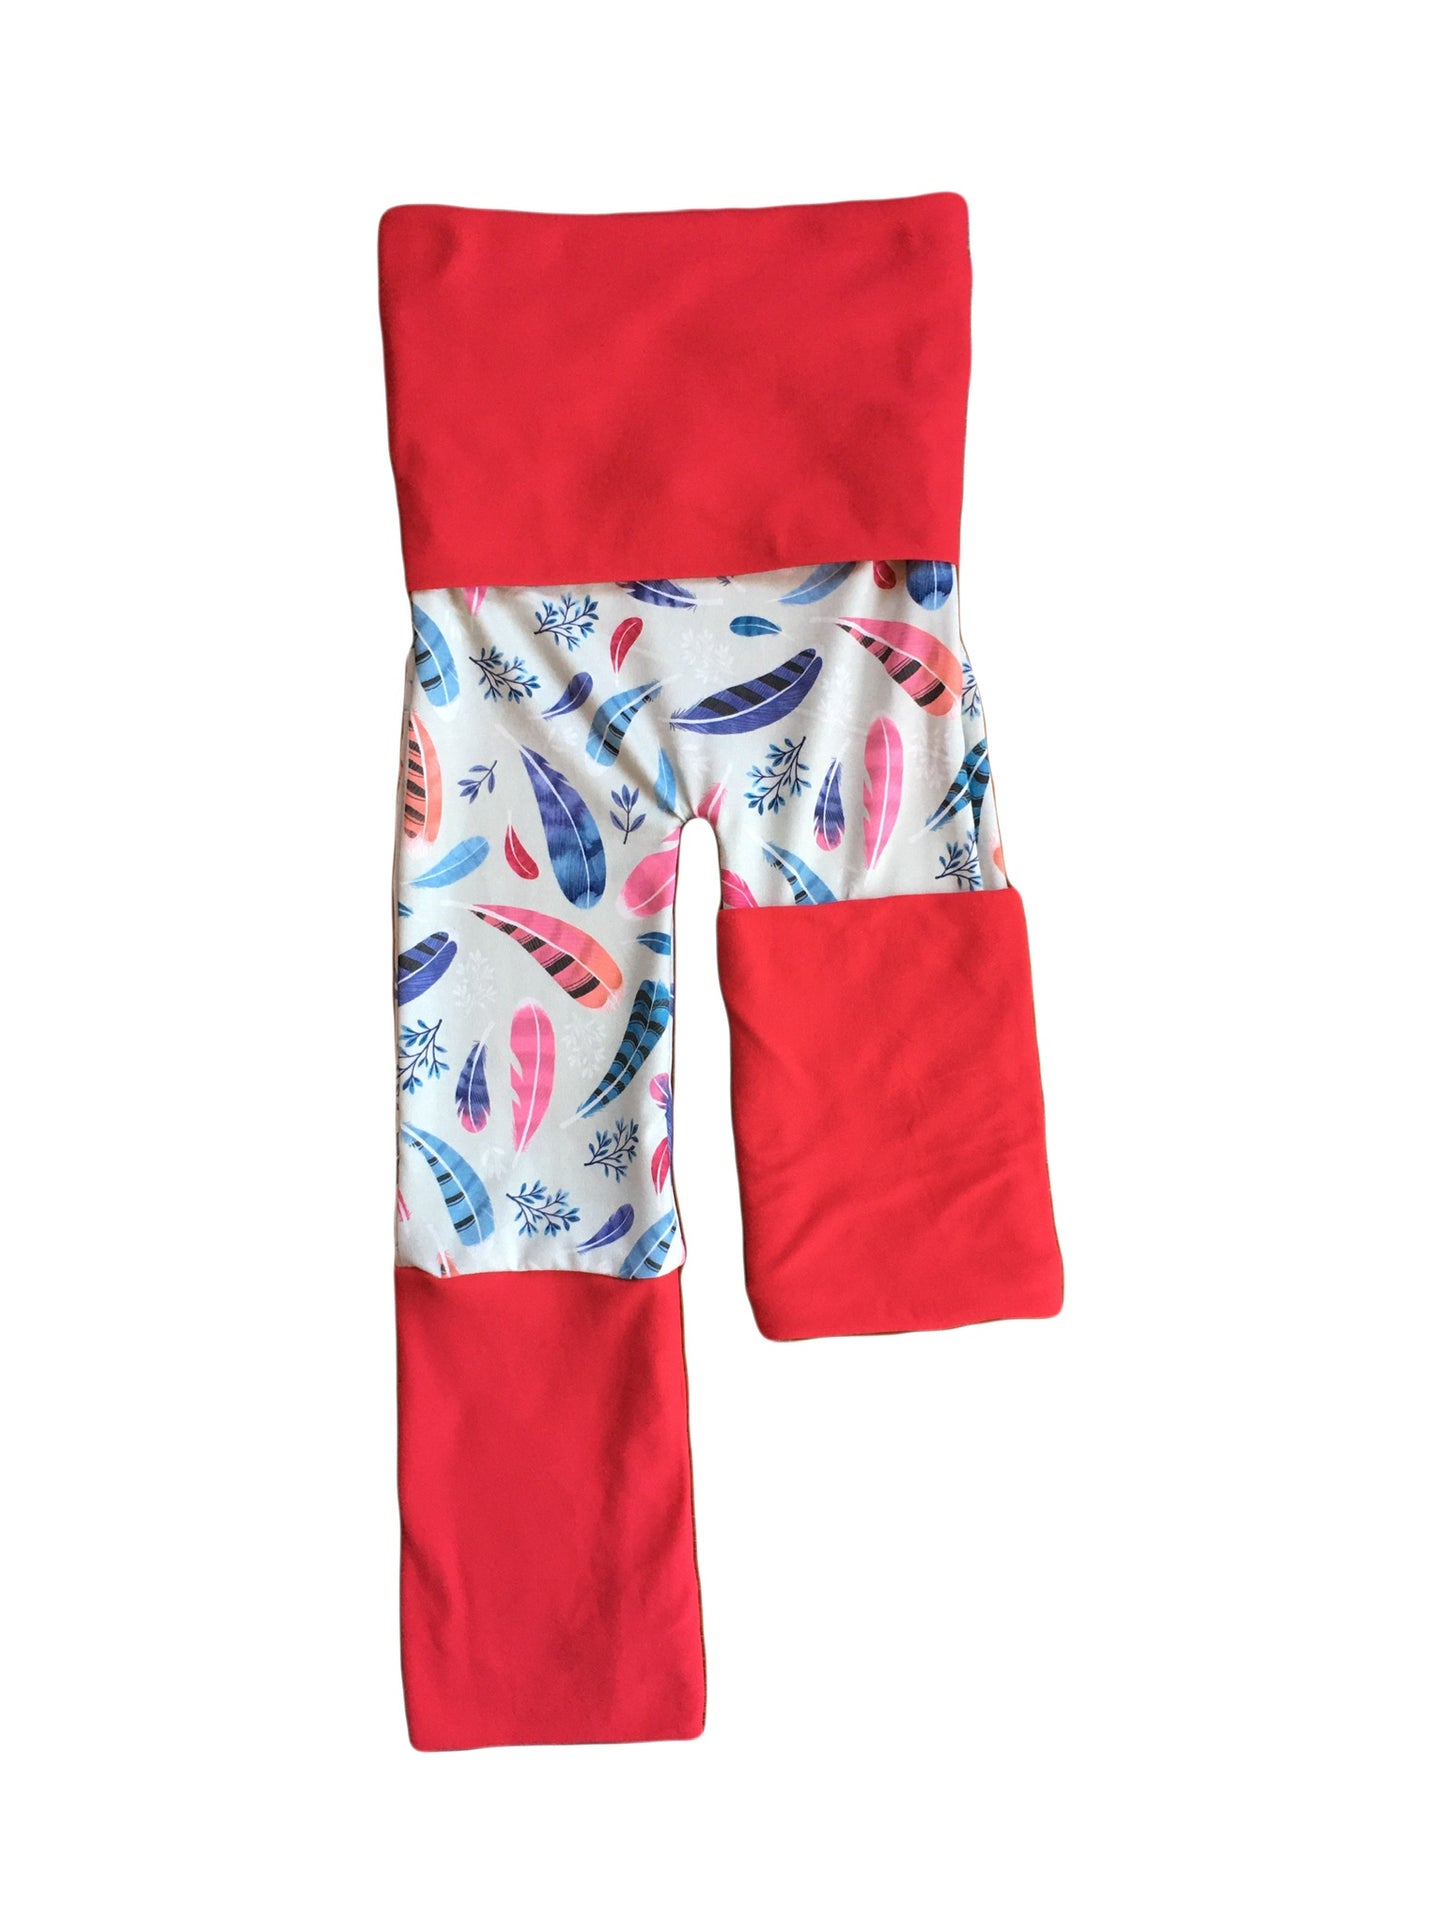 Adjustable Pants - Feathers with Red